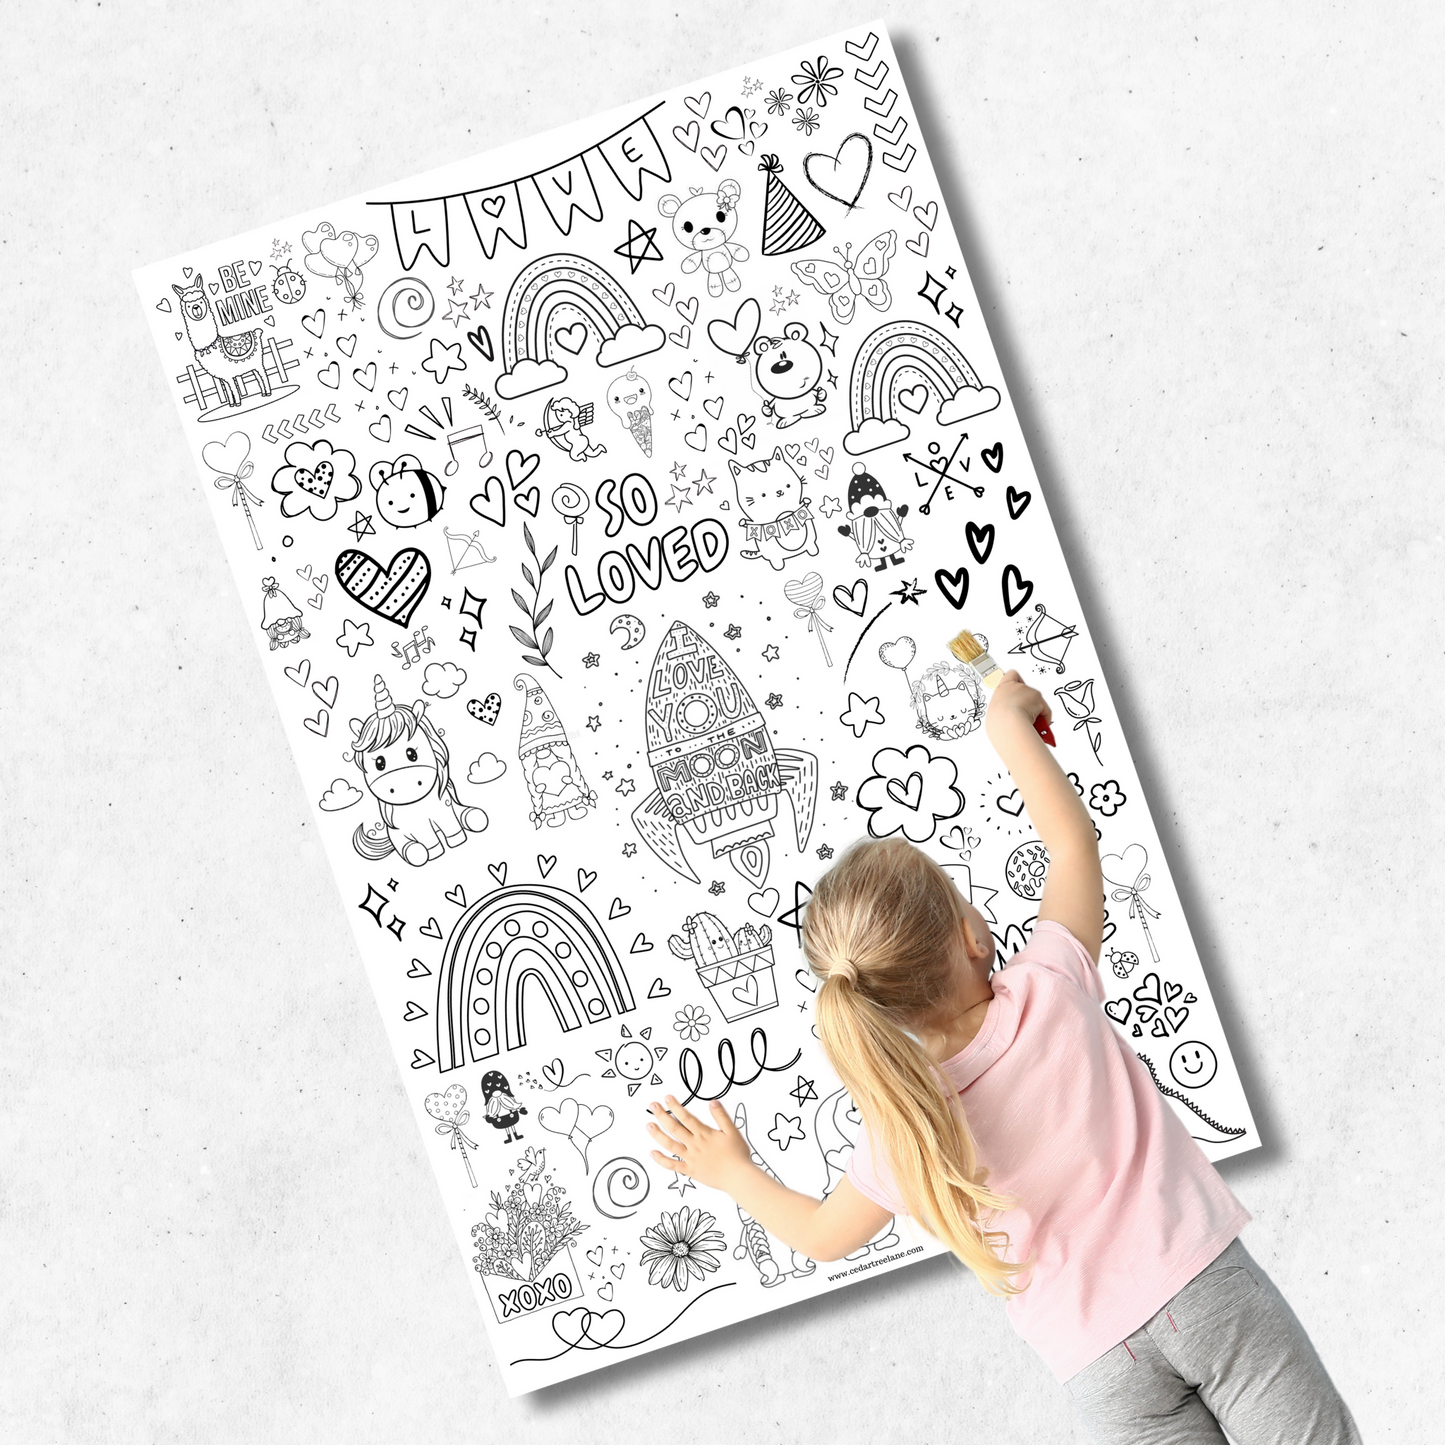 So Loved Coloring Poster | 24x36"